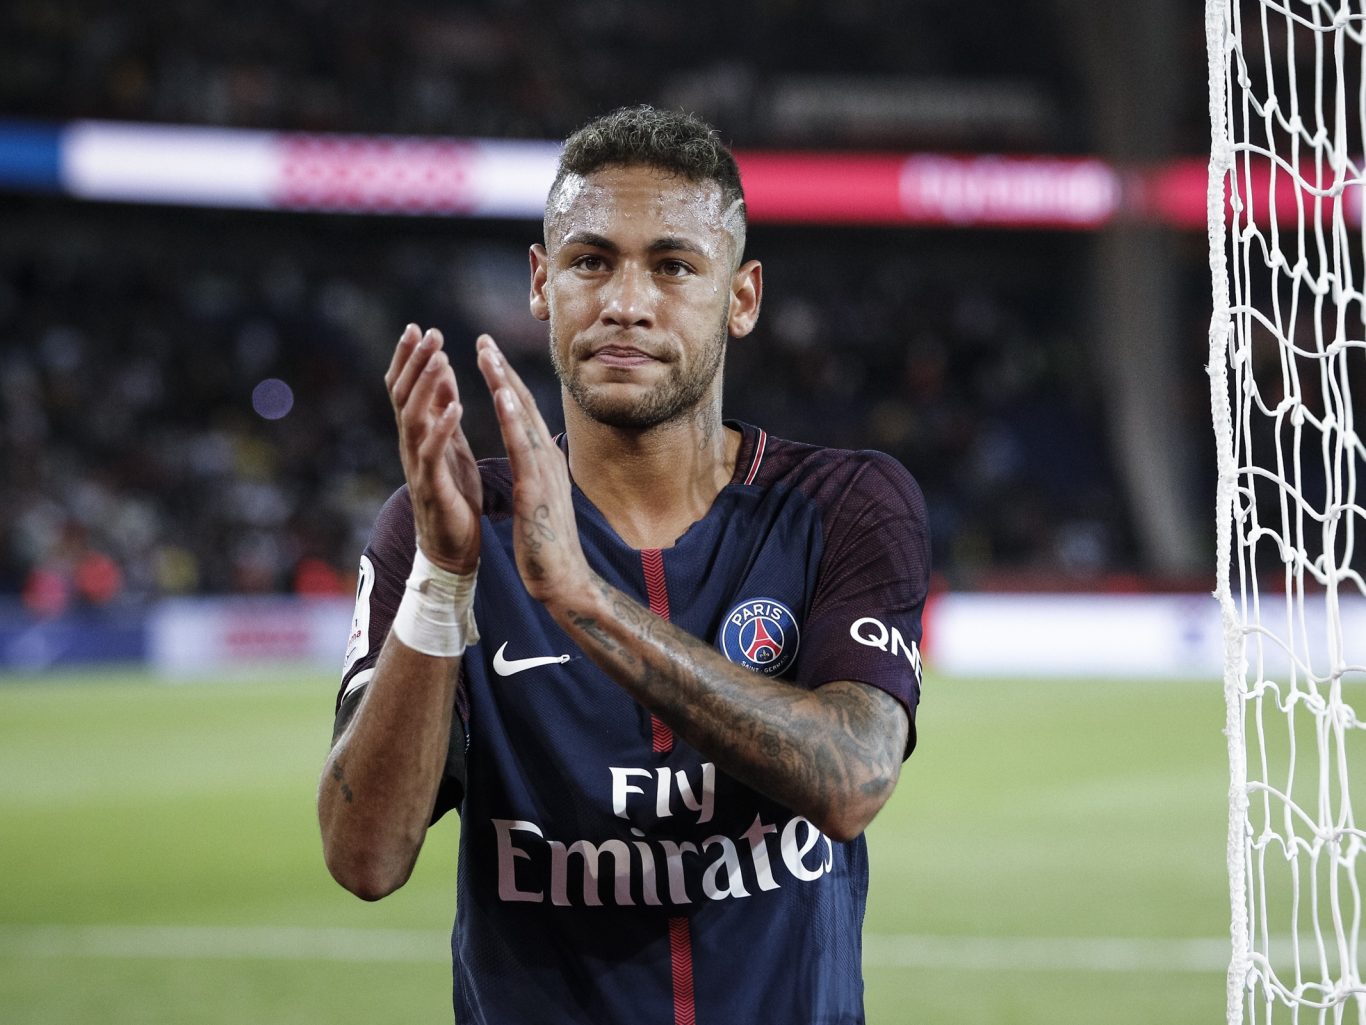 Paris St Germain's world-record signing of Neymar was not enough to push Ligue 1 spending anywhere near Premier League levels (Kamil Zihnioglu/AP)